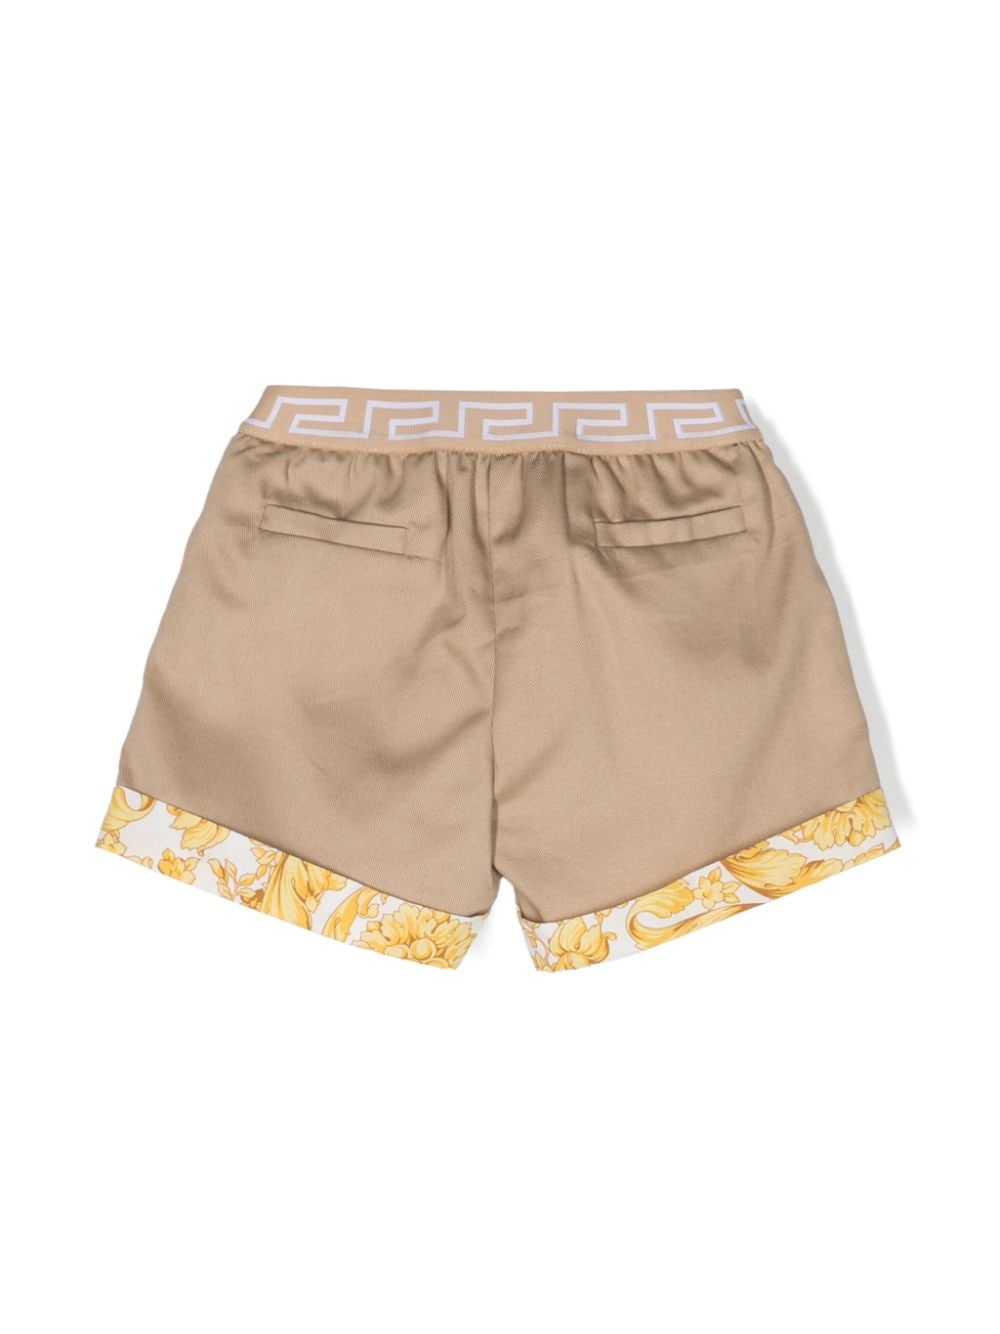 Beige Bermuda shorts for baby girls with logo